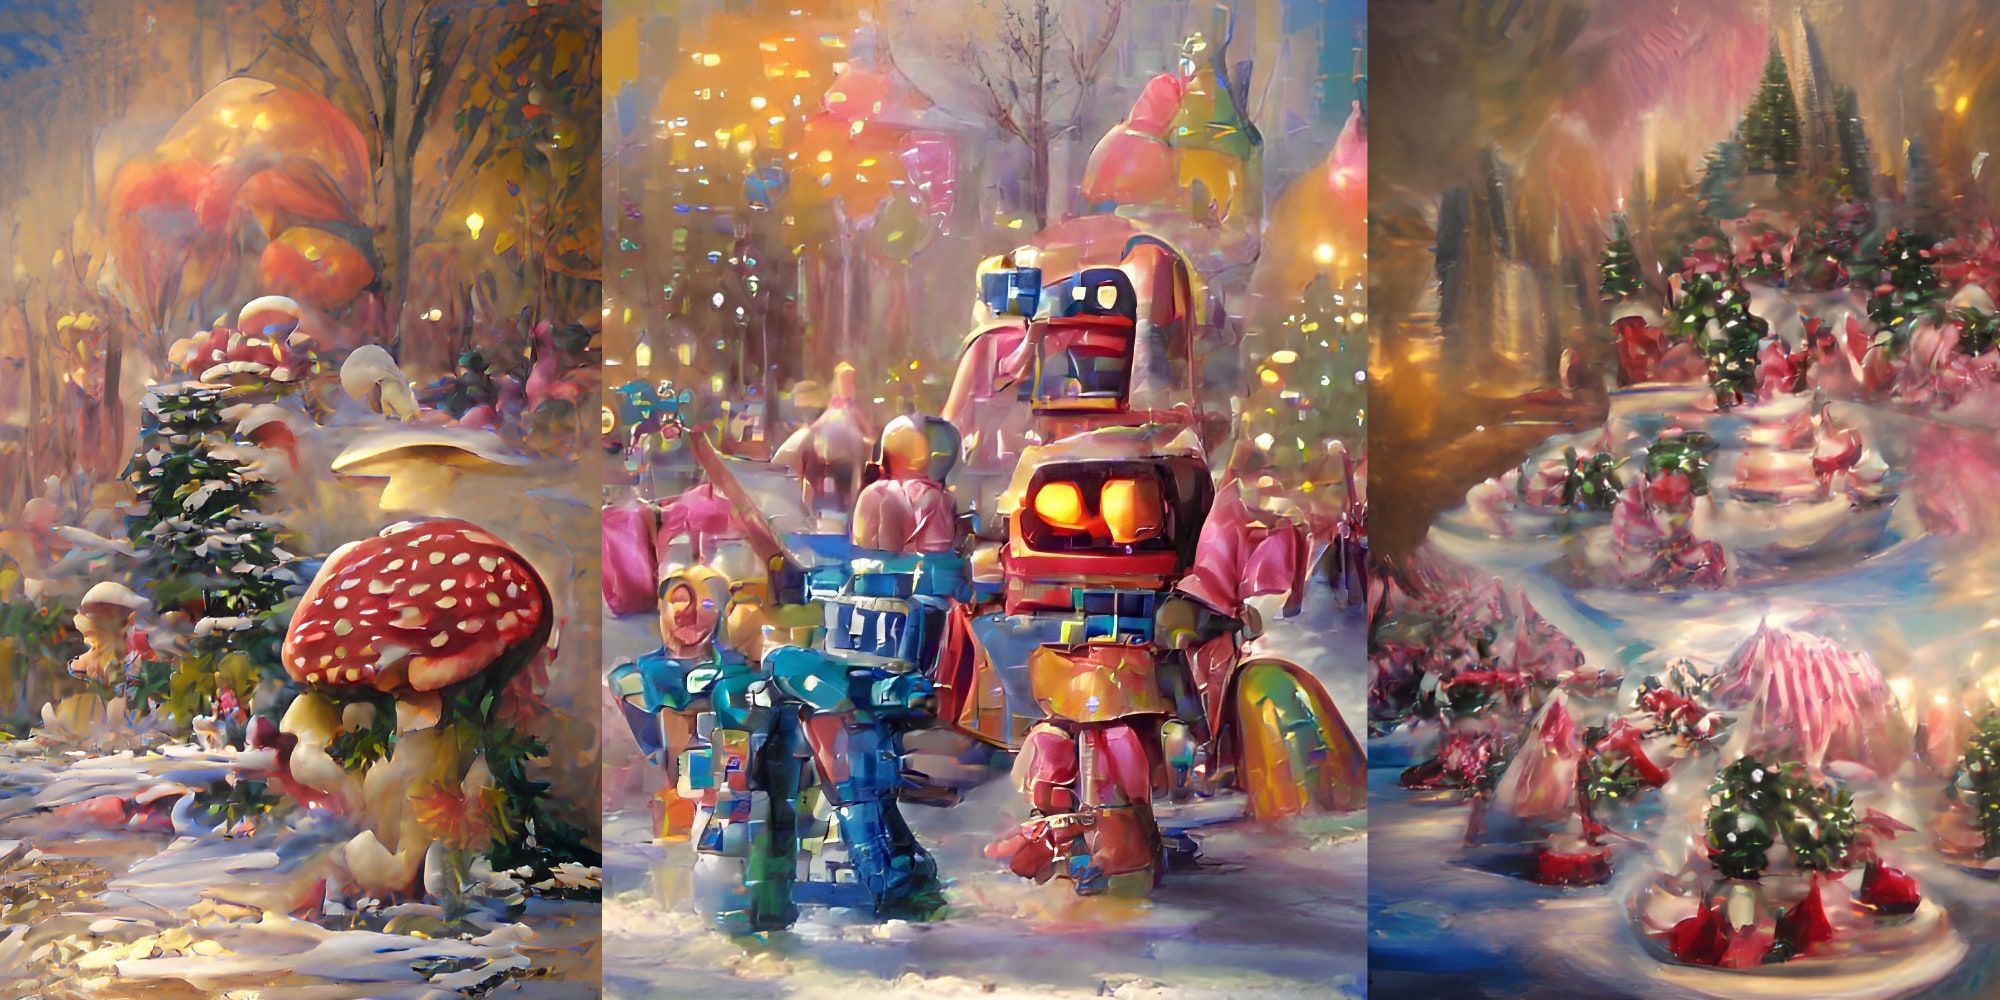 Create Your Own Mind-Blowing Holiday Art With This Free AI App